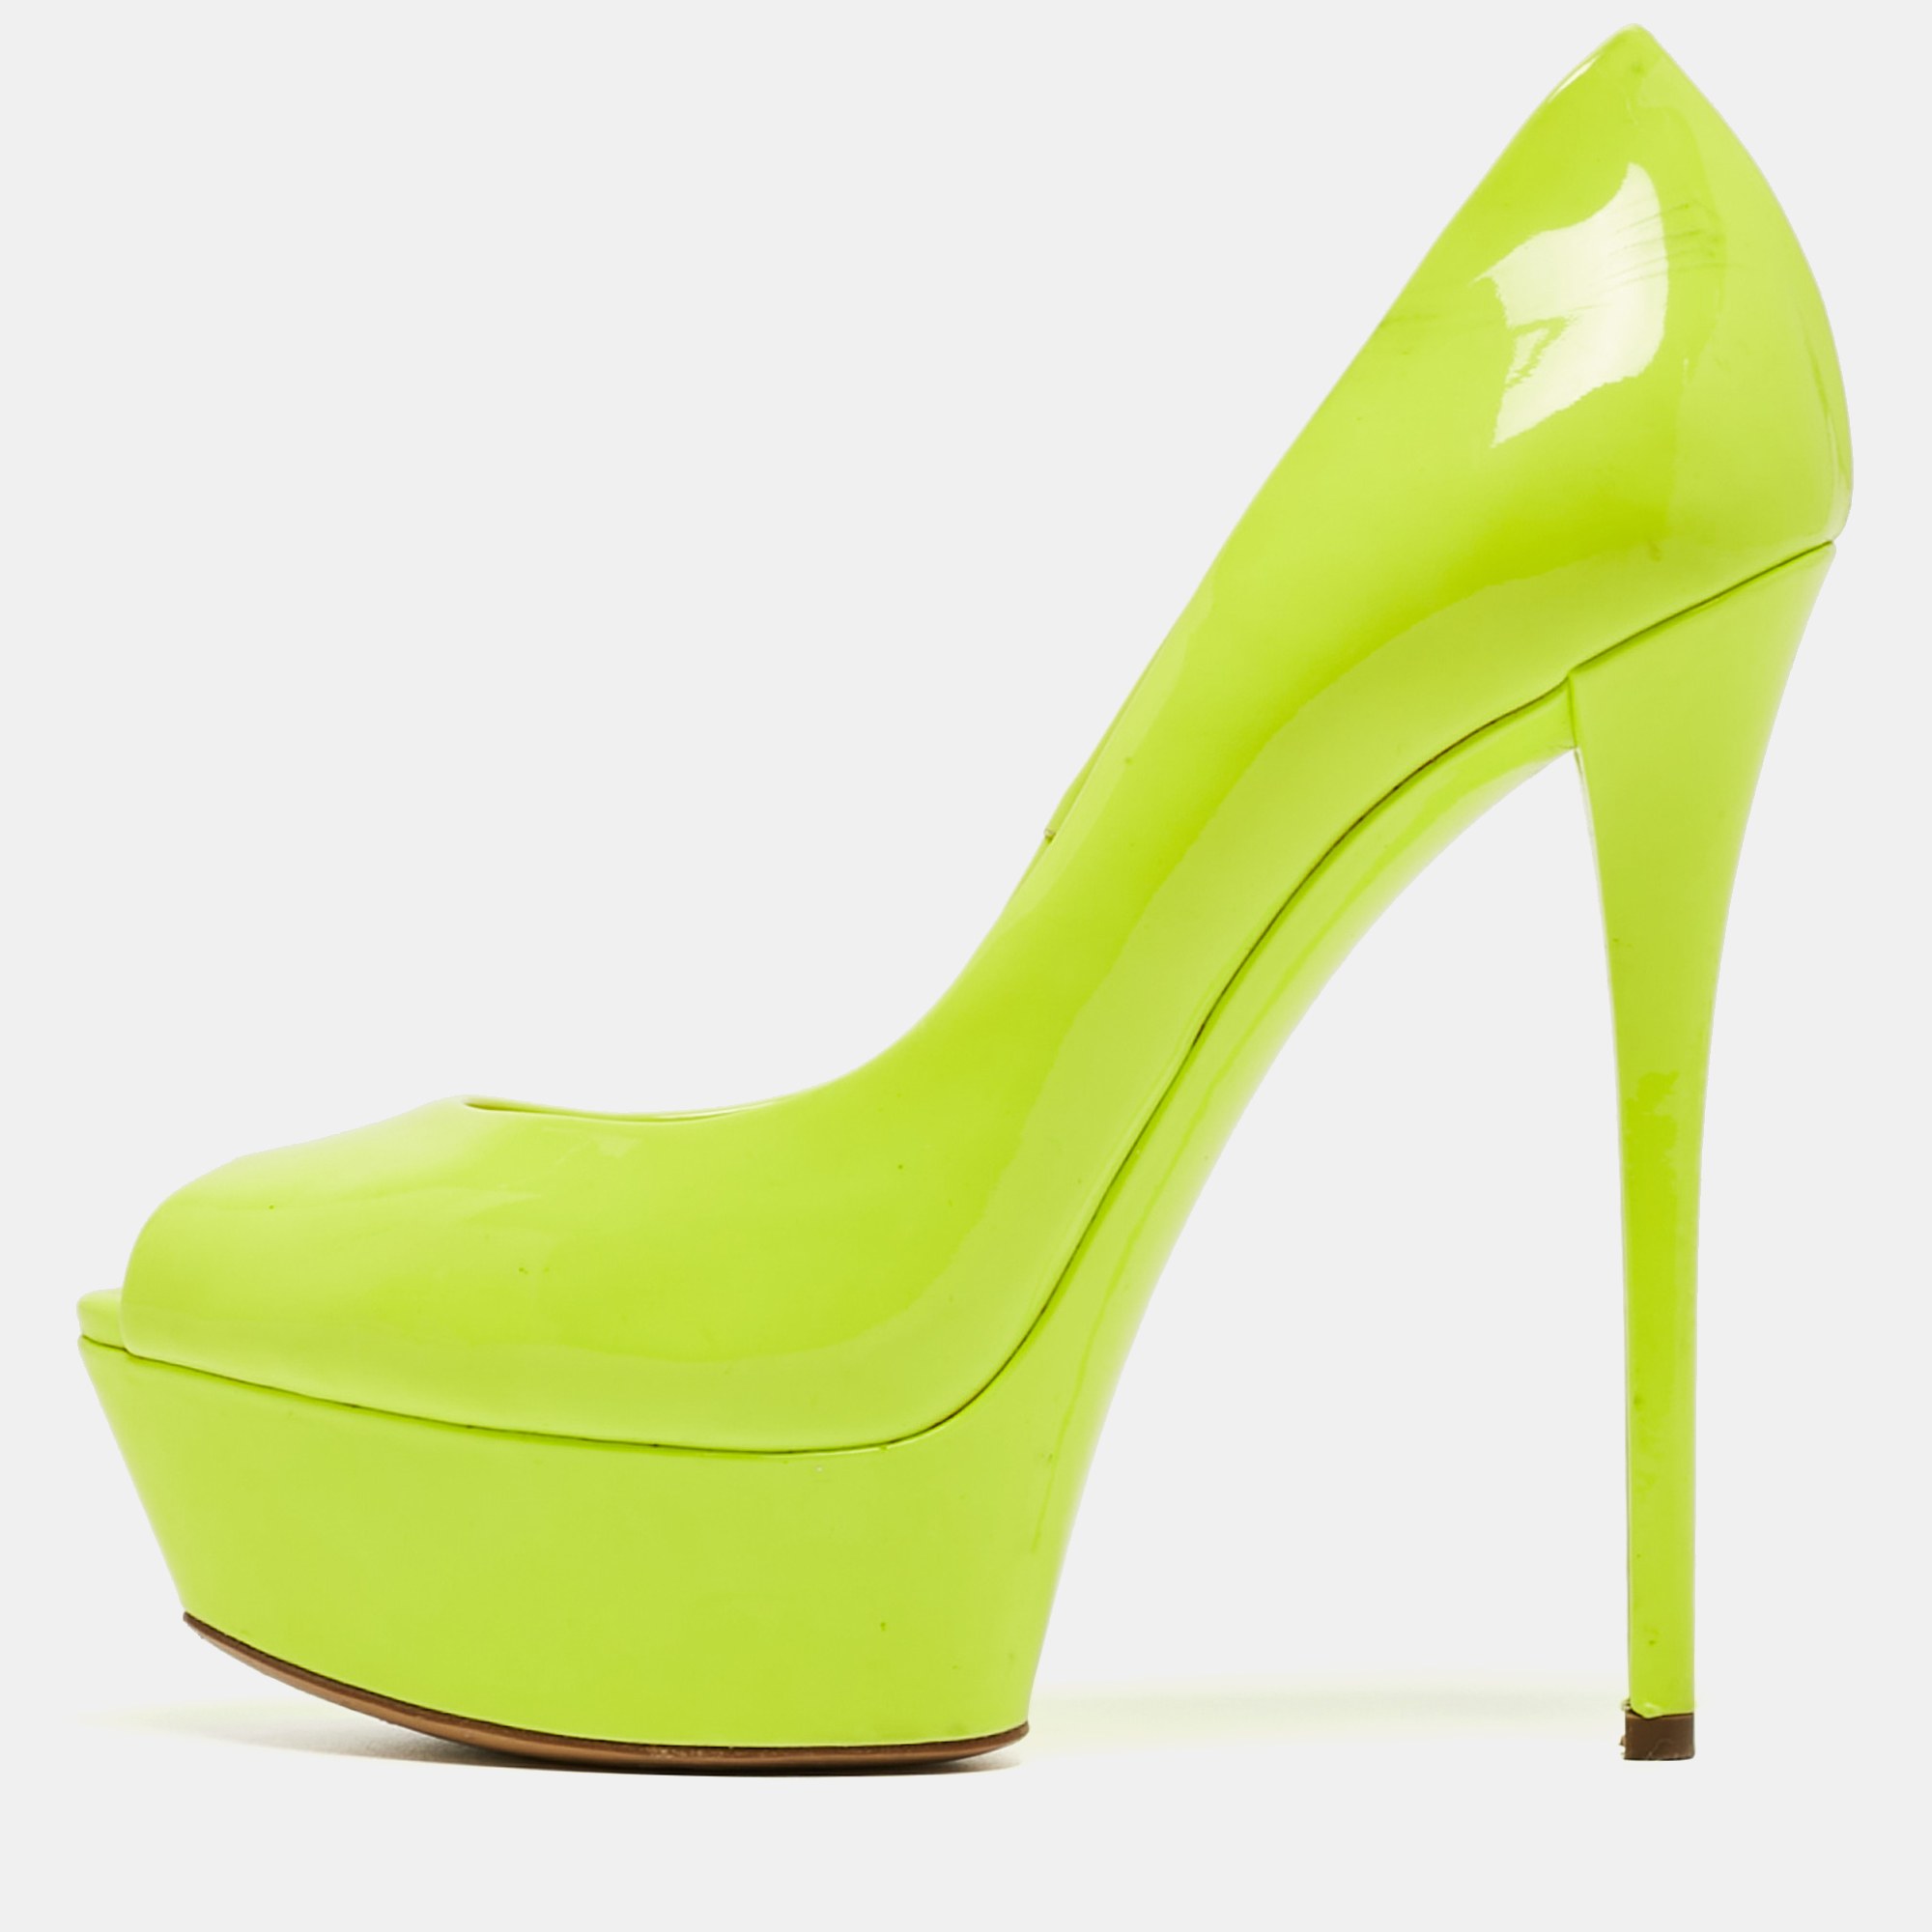 Pre-owned Casadei Lime Green Patent Leather Daisy Peep Toe Platform Pumps Size 37